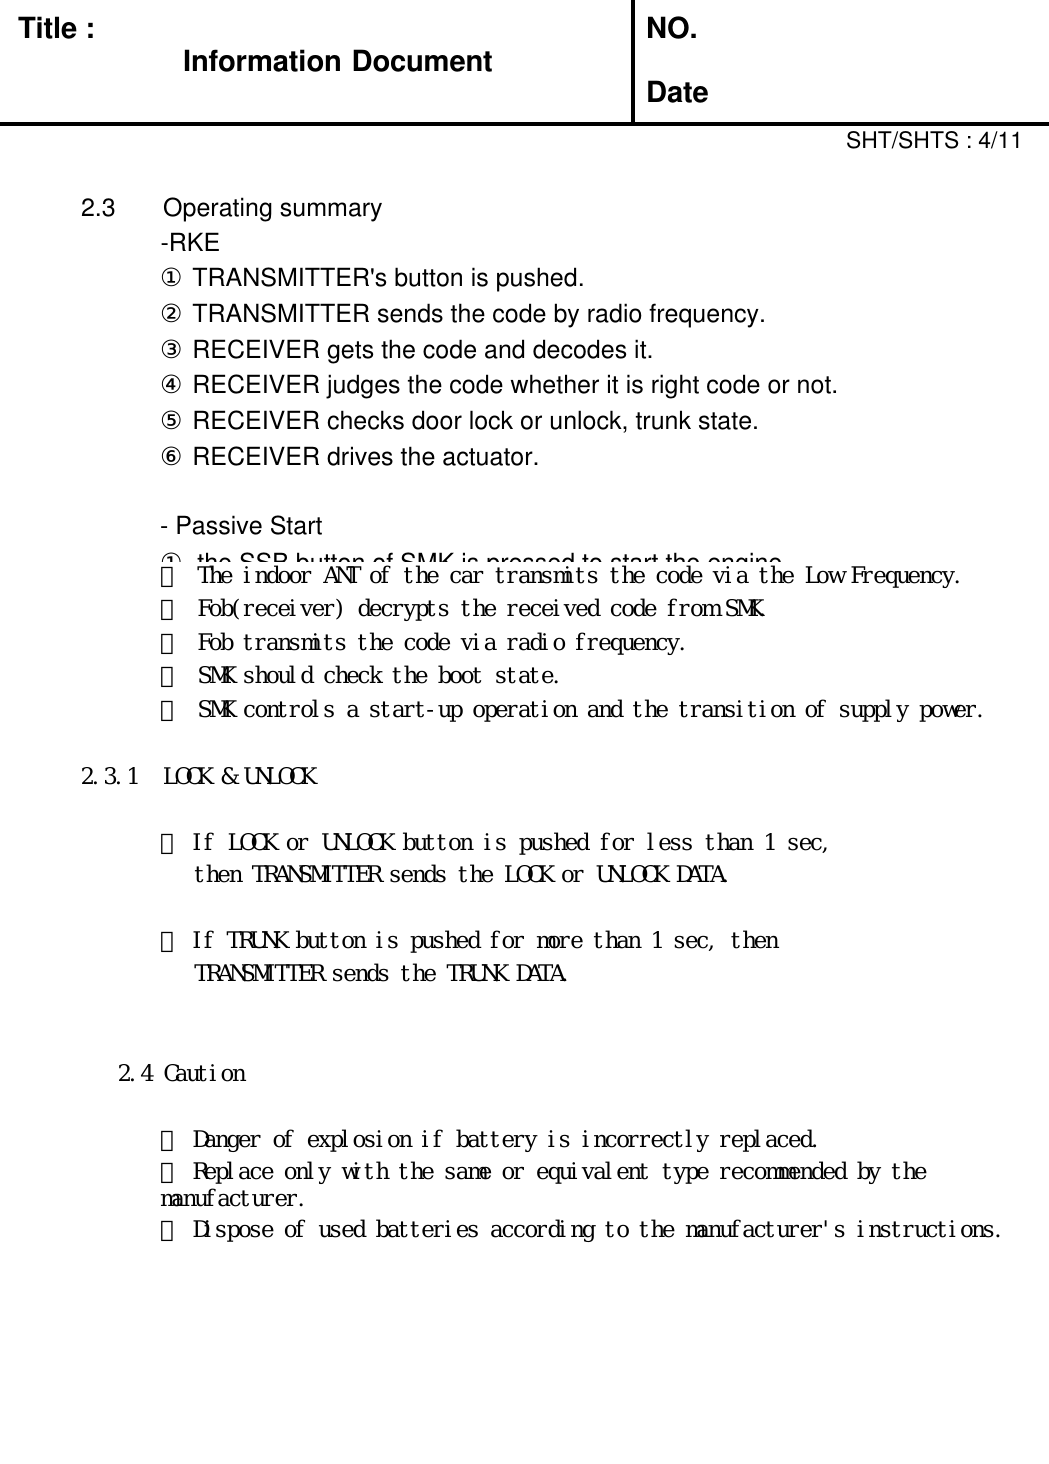 Title : Information DocumentNO.Date2.3 Operating summary-RKE①TRANSMITTER&apos;s button is pushed.②TRANSMITTER sends the code by radio frequency.③RECEIVER gets the code and decodes it.④RECEIVER judges the code whether it is right code or not.⑤RECEIVER checks door lock or unlock, trunk state.⑥RECEIVER drives the actuator.- Passive Start①the SSB button of SMK is pressed to start the engine.SHT/SHTS : 4/11② The indoor ANT of the car transmits the code via the Low Frequency.③ Fob(receiver) decrypts the received code from SMK.④ Fob transmits the code via radio frequency.⑤ SMK should check the boot state.⑥ SMK controls a start-up operation and the transition of supply power.2.3.1 LOCK &amp; UNLOCK① If LOCK or UNLOCK button is pushed for less than 1 sec, then TRANSMITTER sends the LOCK or UNLOCK DATA.② If TRUNK button is pushed for more than 1 sec, thenTRANSMITTER sends the TRUNK DATA.2.4 Caution① Danger of explosion if battery is incorrectly replaced.② Replace only with the same or equivalent type recommended by the manufacturer.③ Dispose of used batteries according to the manufacturer&apos;s instructions.